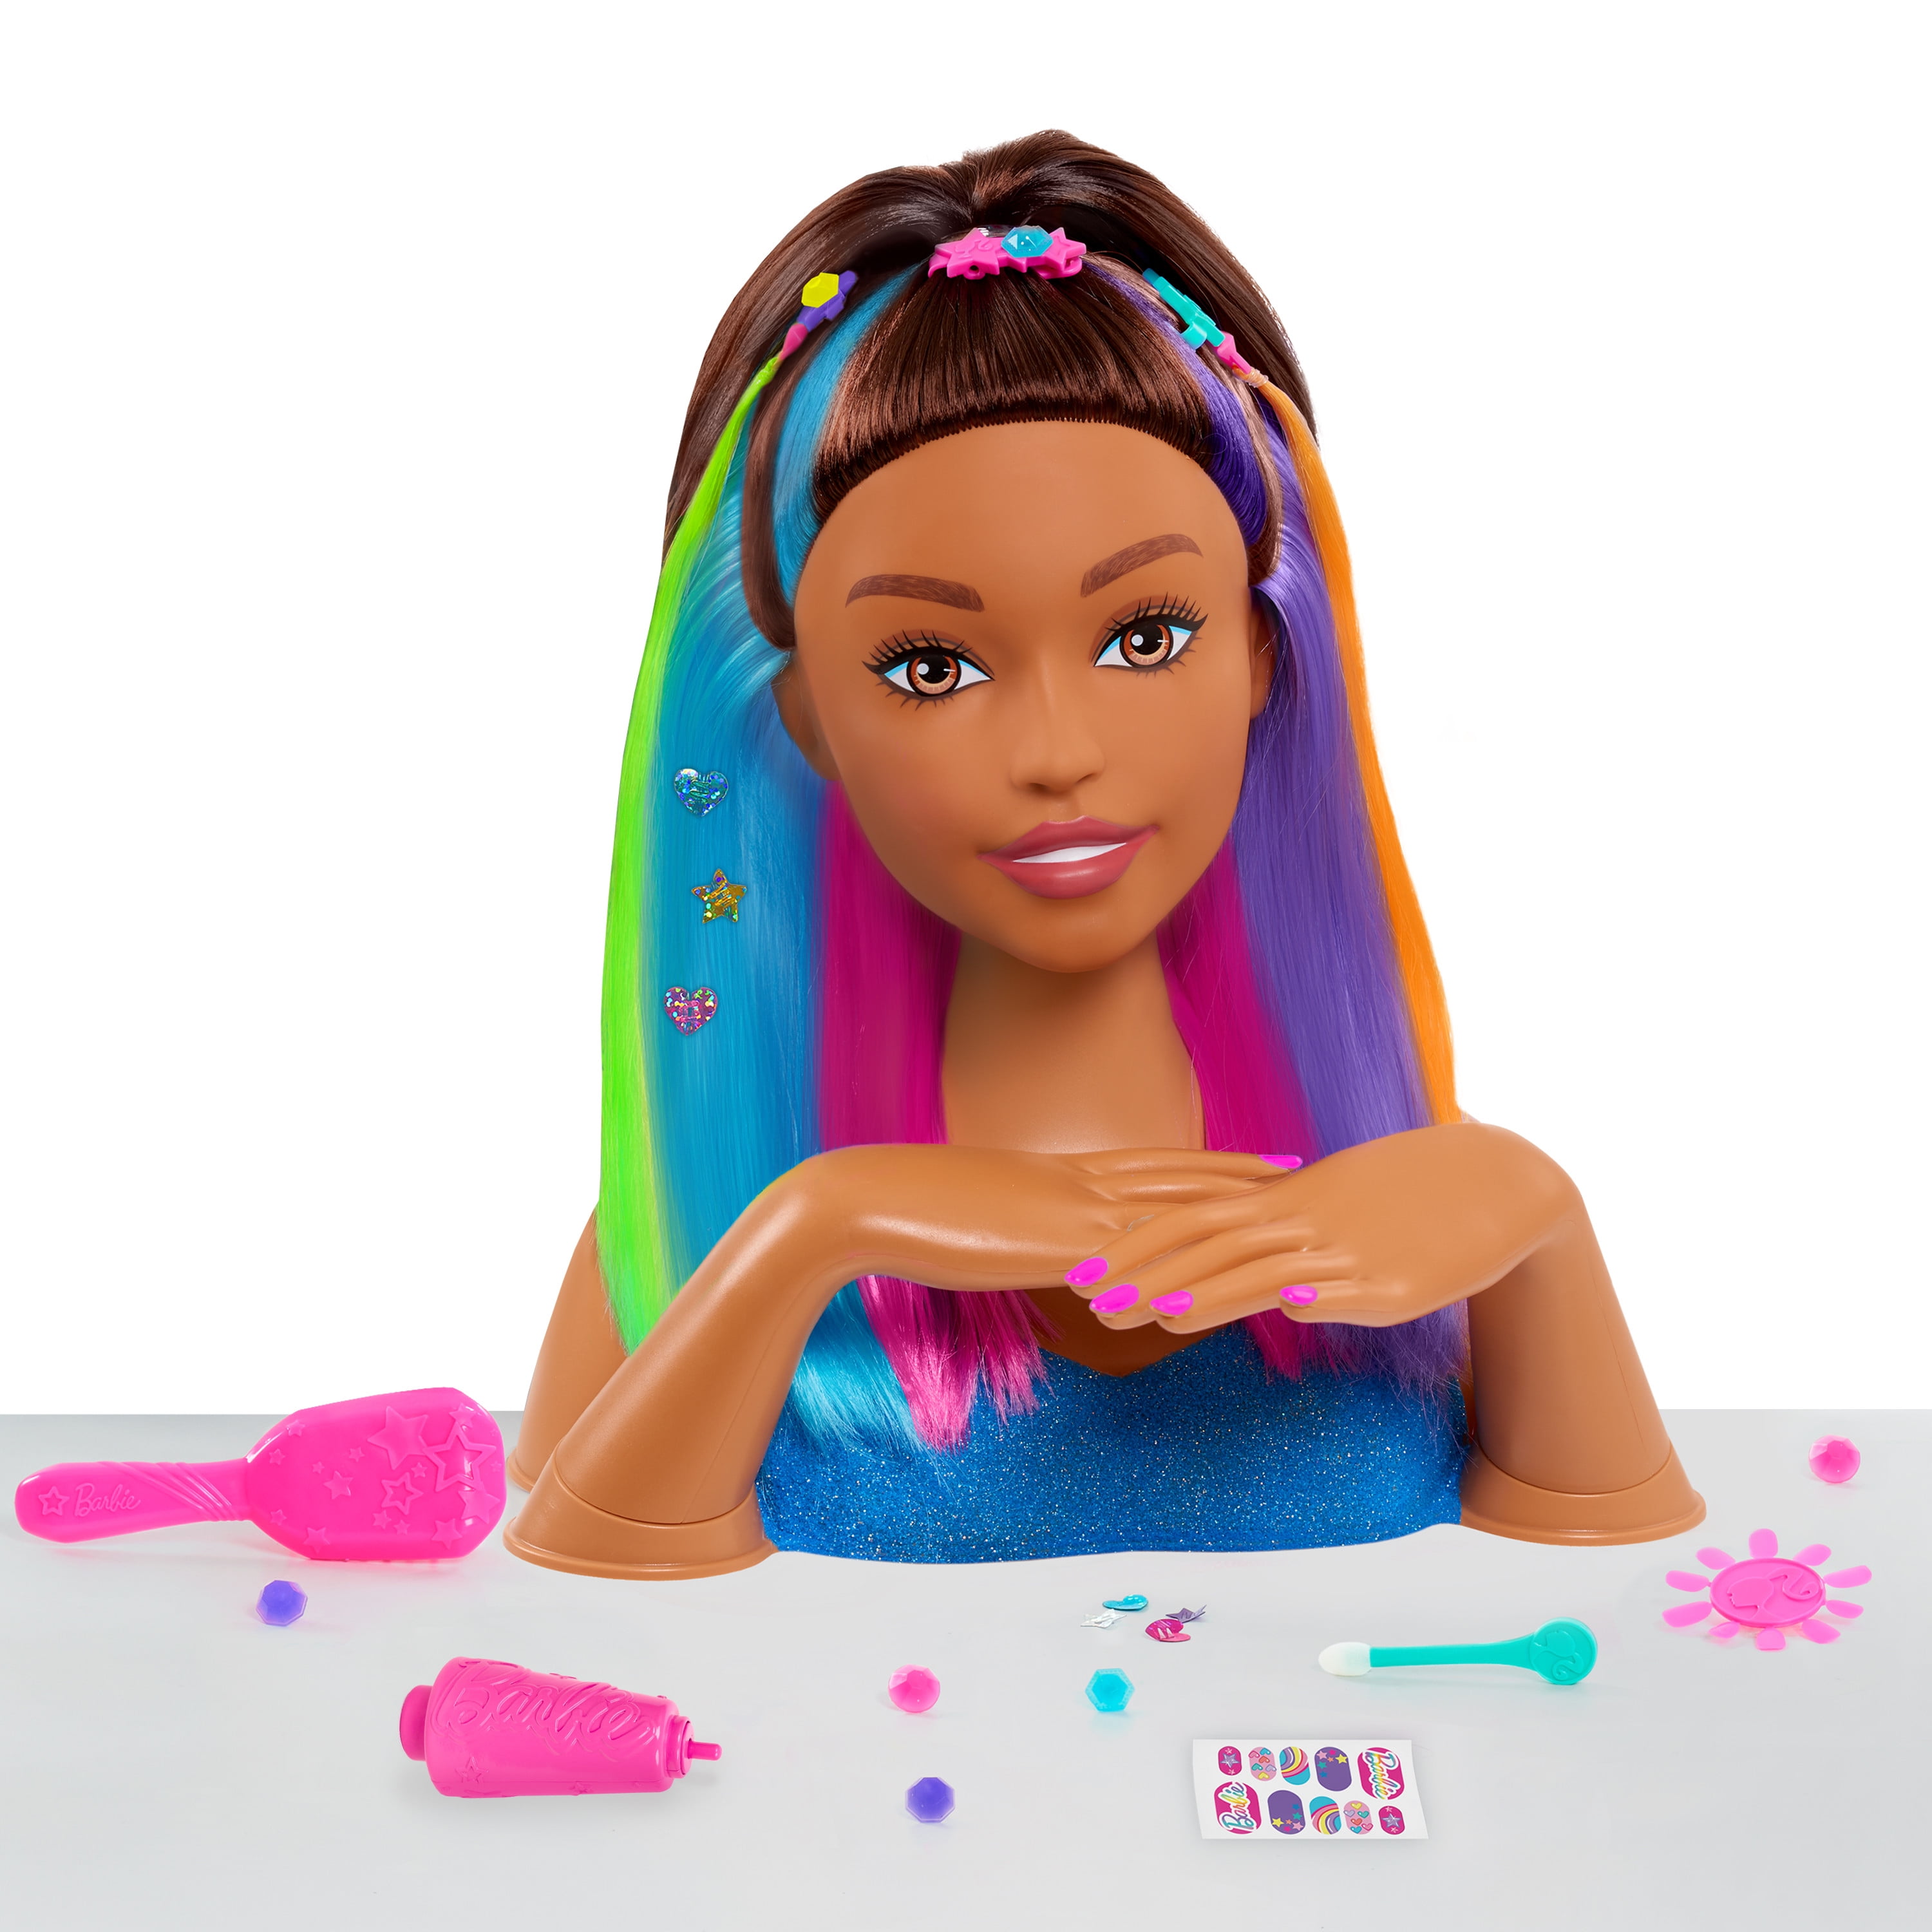 Barbie - With the #Barbie Rainbow Sparkle Hair doll, there are so